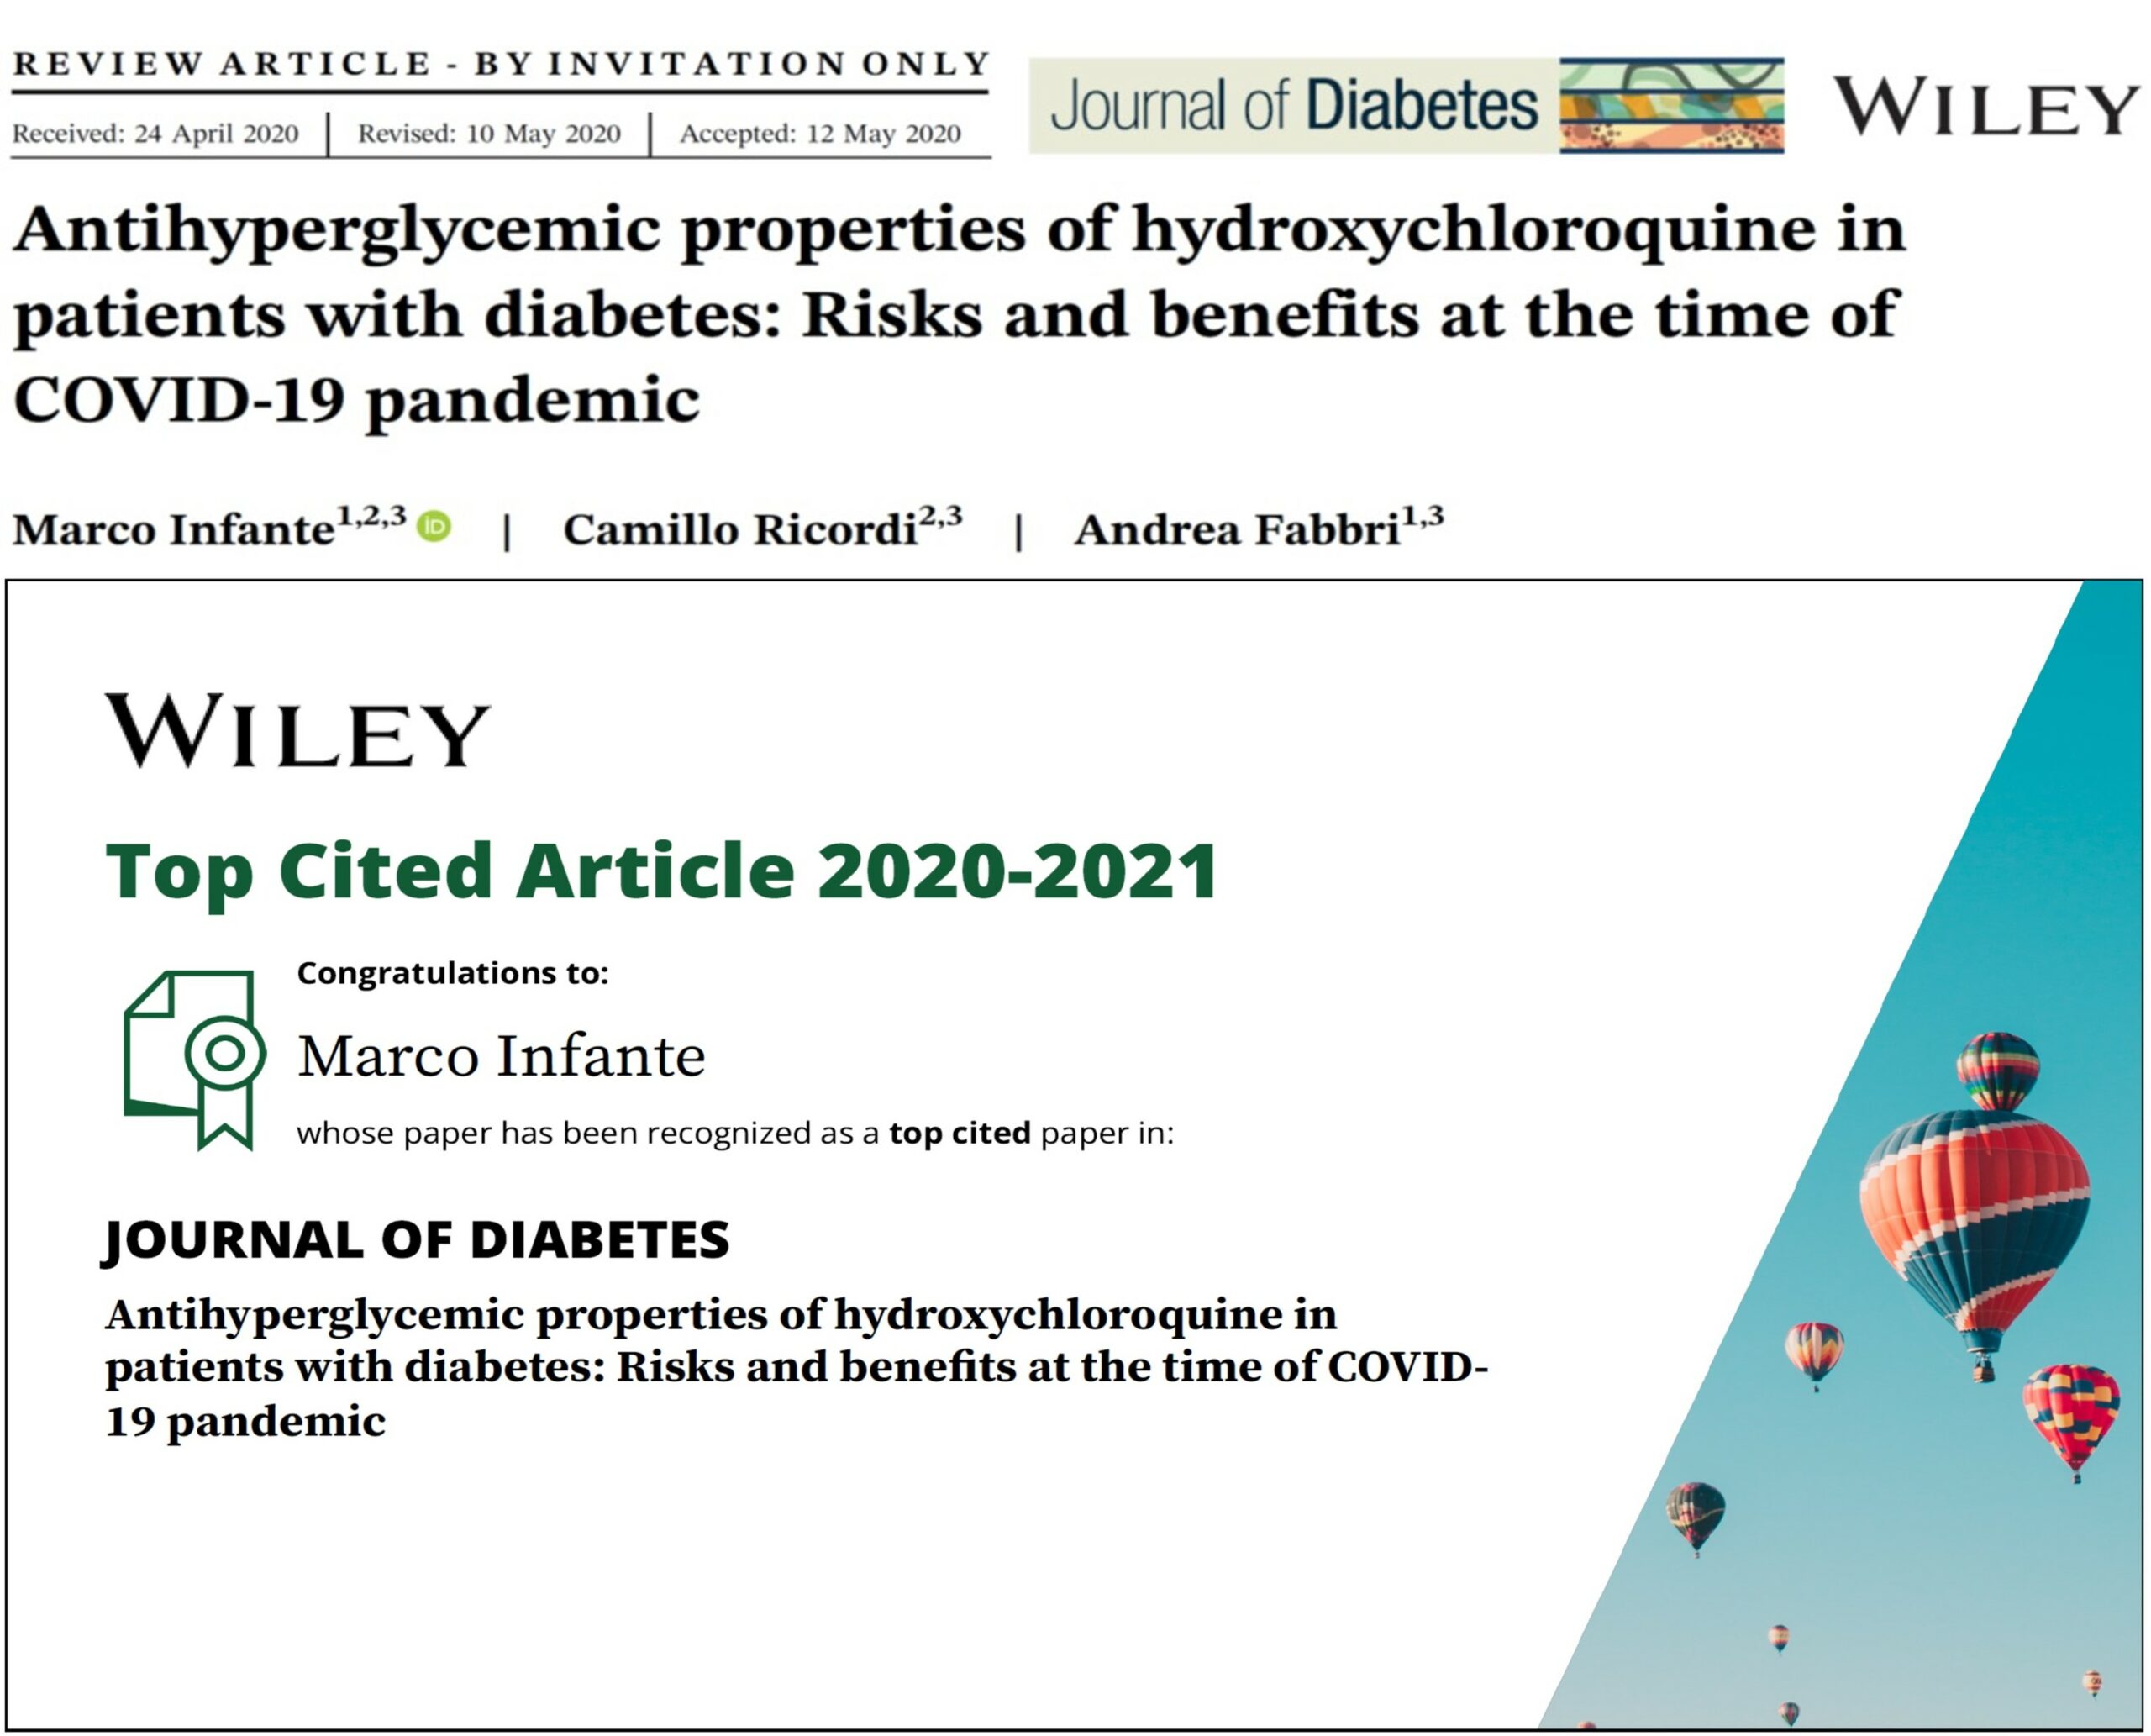 Antihyperglycemic properties of hydroxychloroquine in patients with diabetes: Risks and benefits at the time of COVID-19 pandemic” among the Top Cited Papers 2020-2021 in Journal of Diabetes